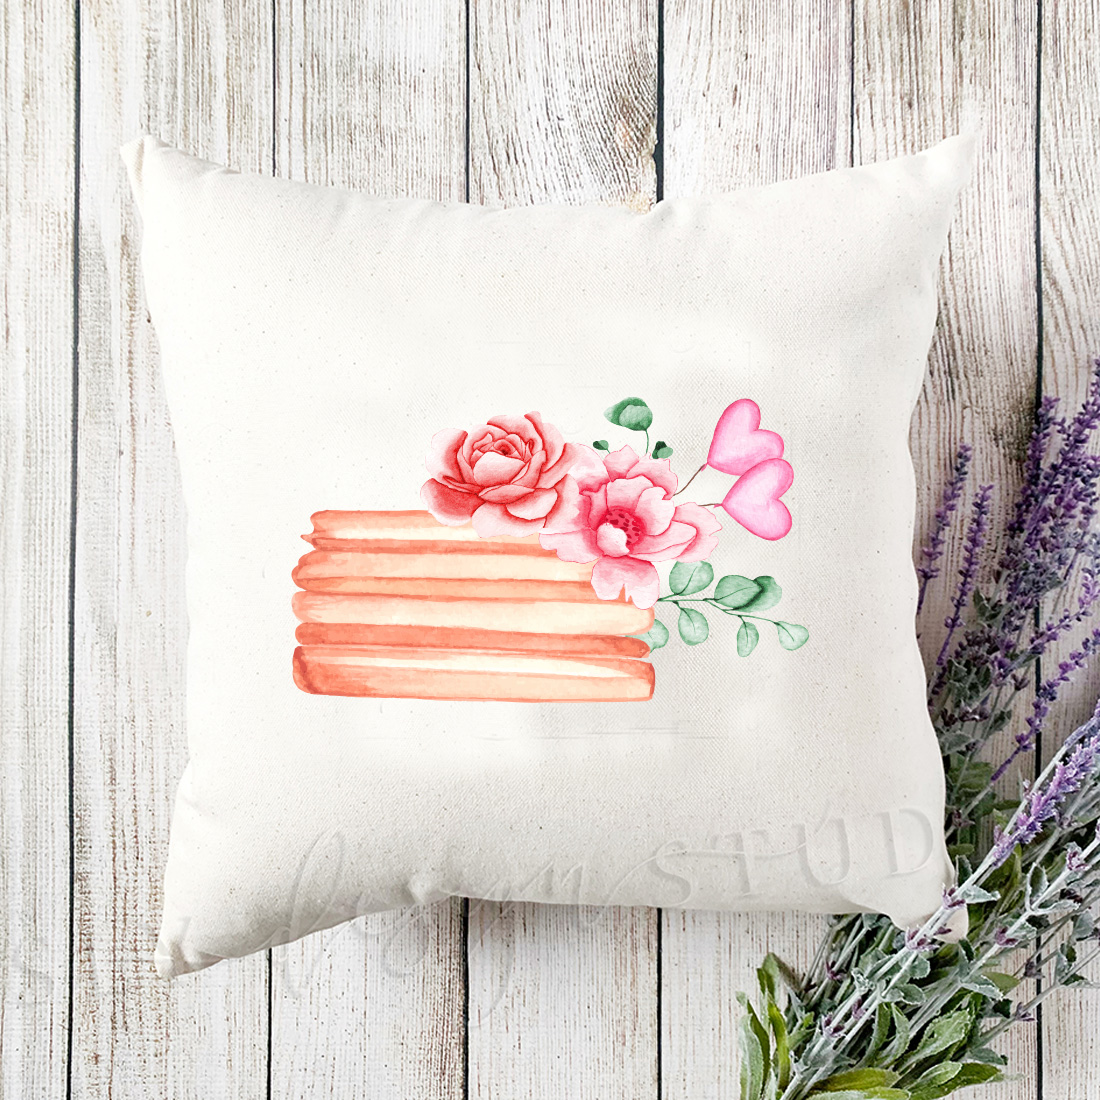 White pillow with wooden slice with flowers.